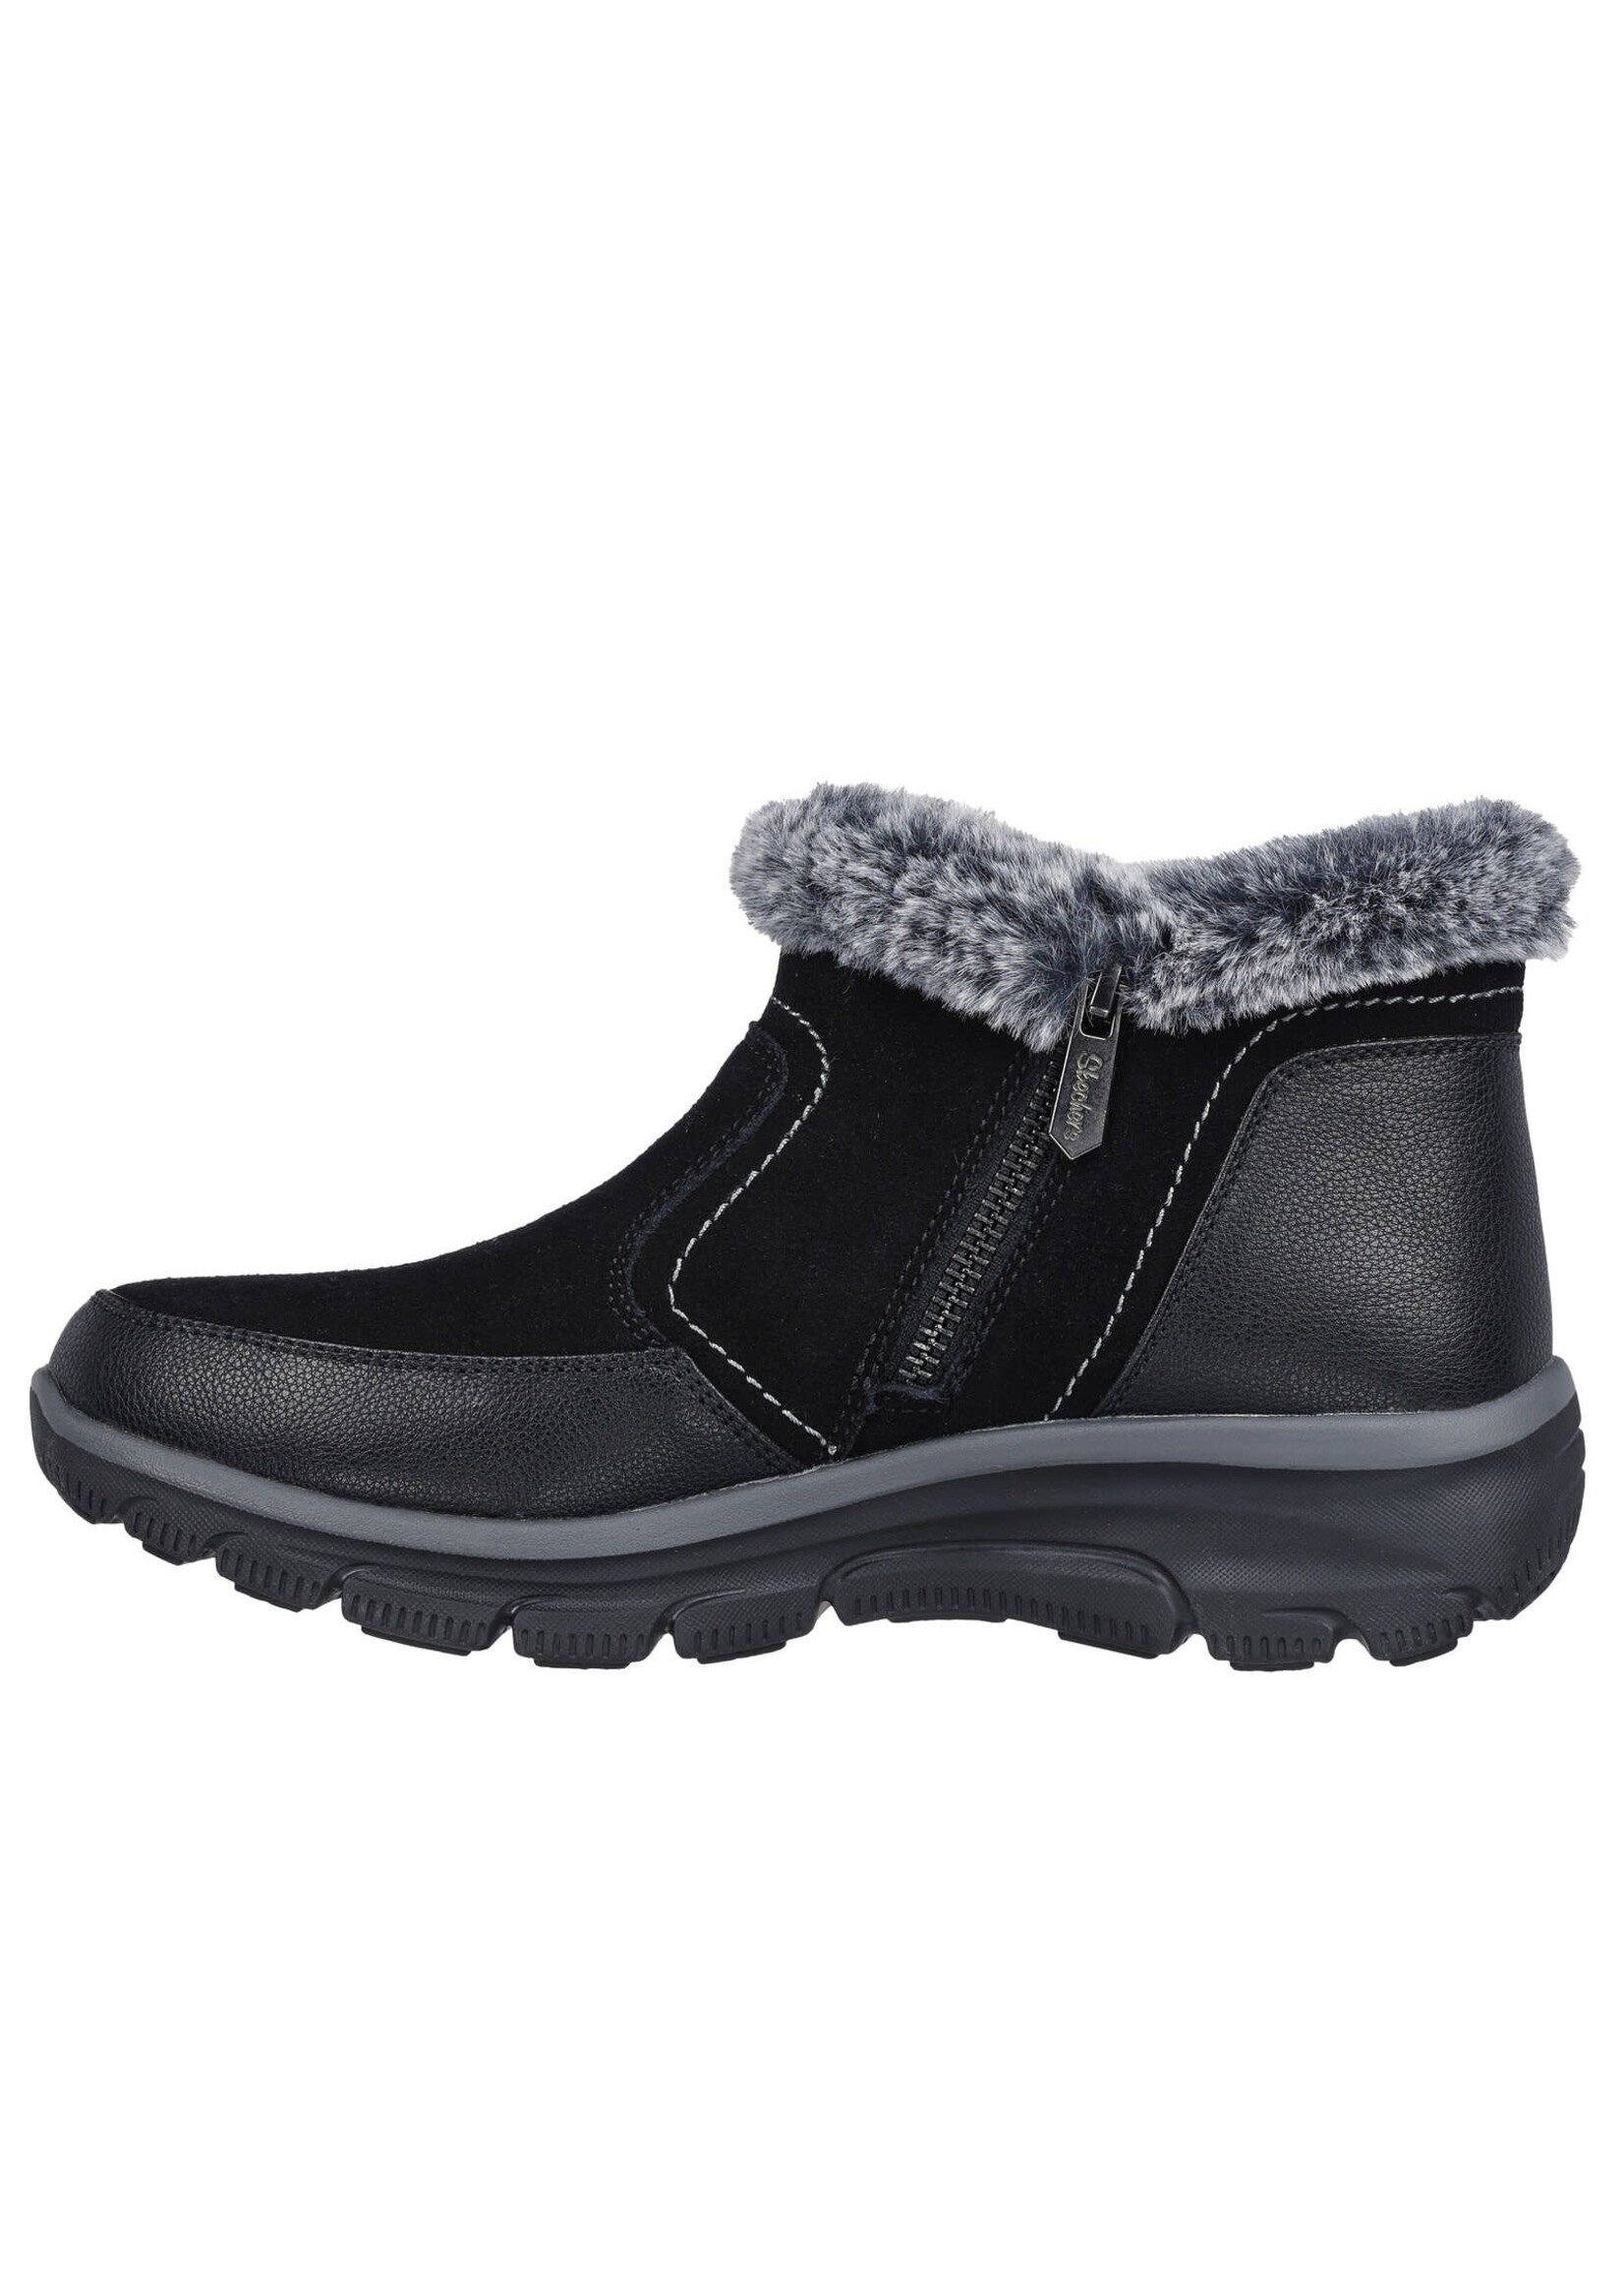 Women's Easy Going Warm Escape Fashion Boot Black - SHOE PLUS - Low Prices  - Express Shipping - 100s of Items to Choose From!